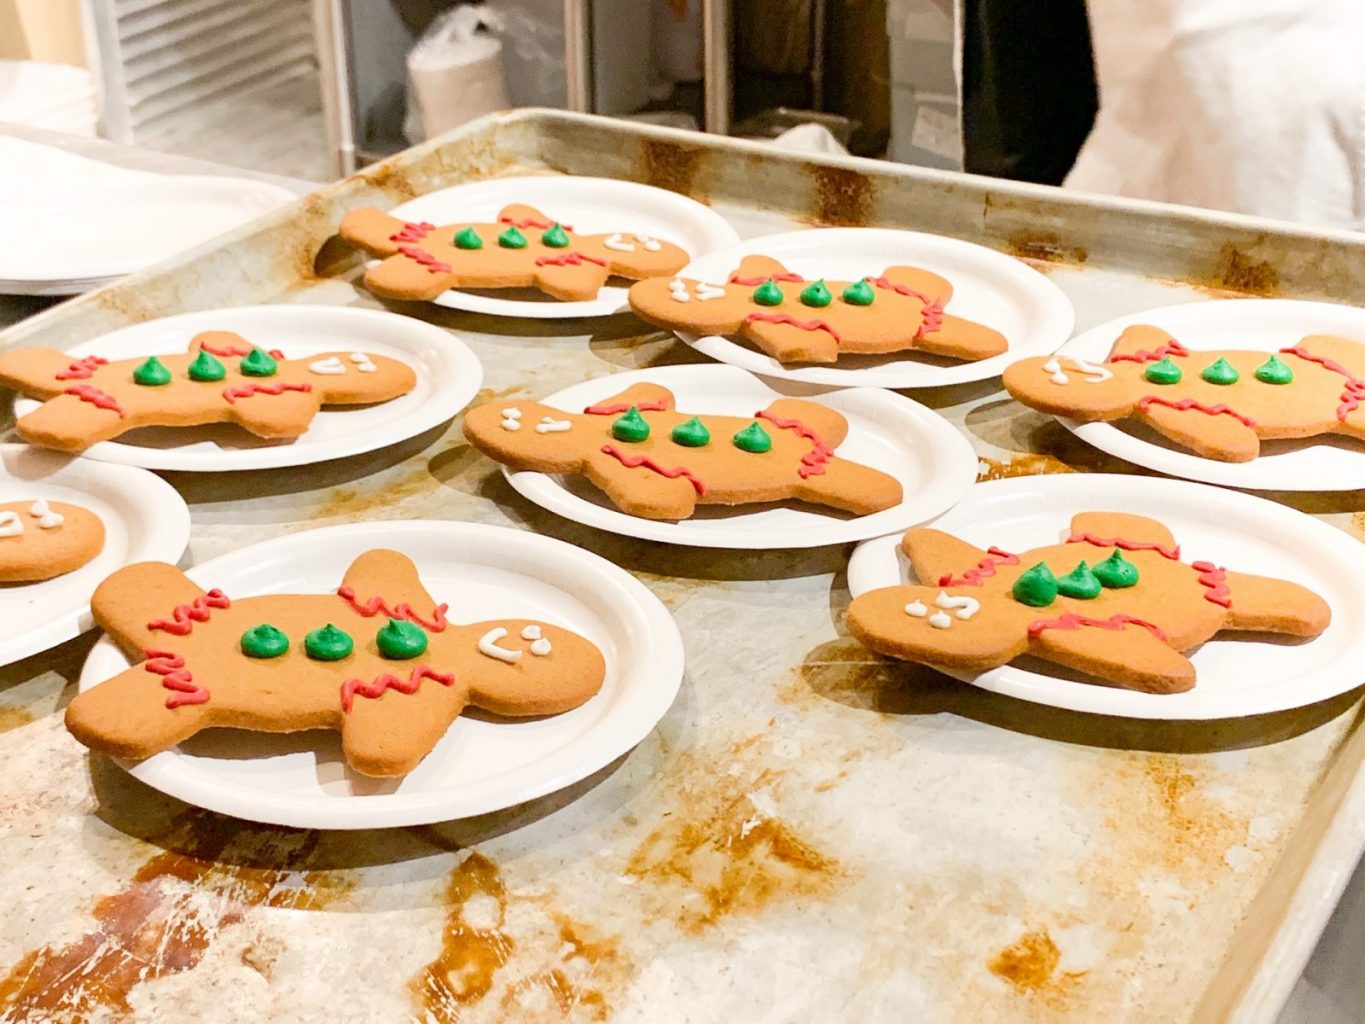 gingerbread man cookies sitting on plates ready to be served